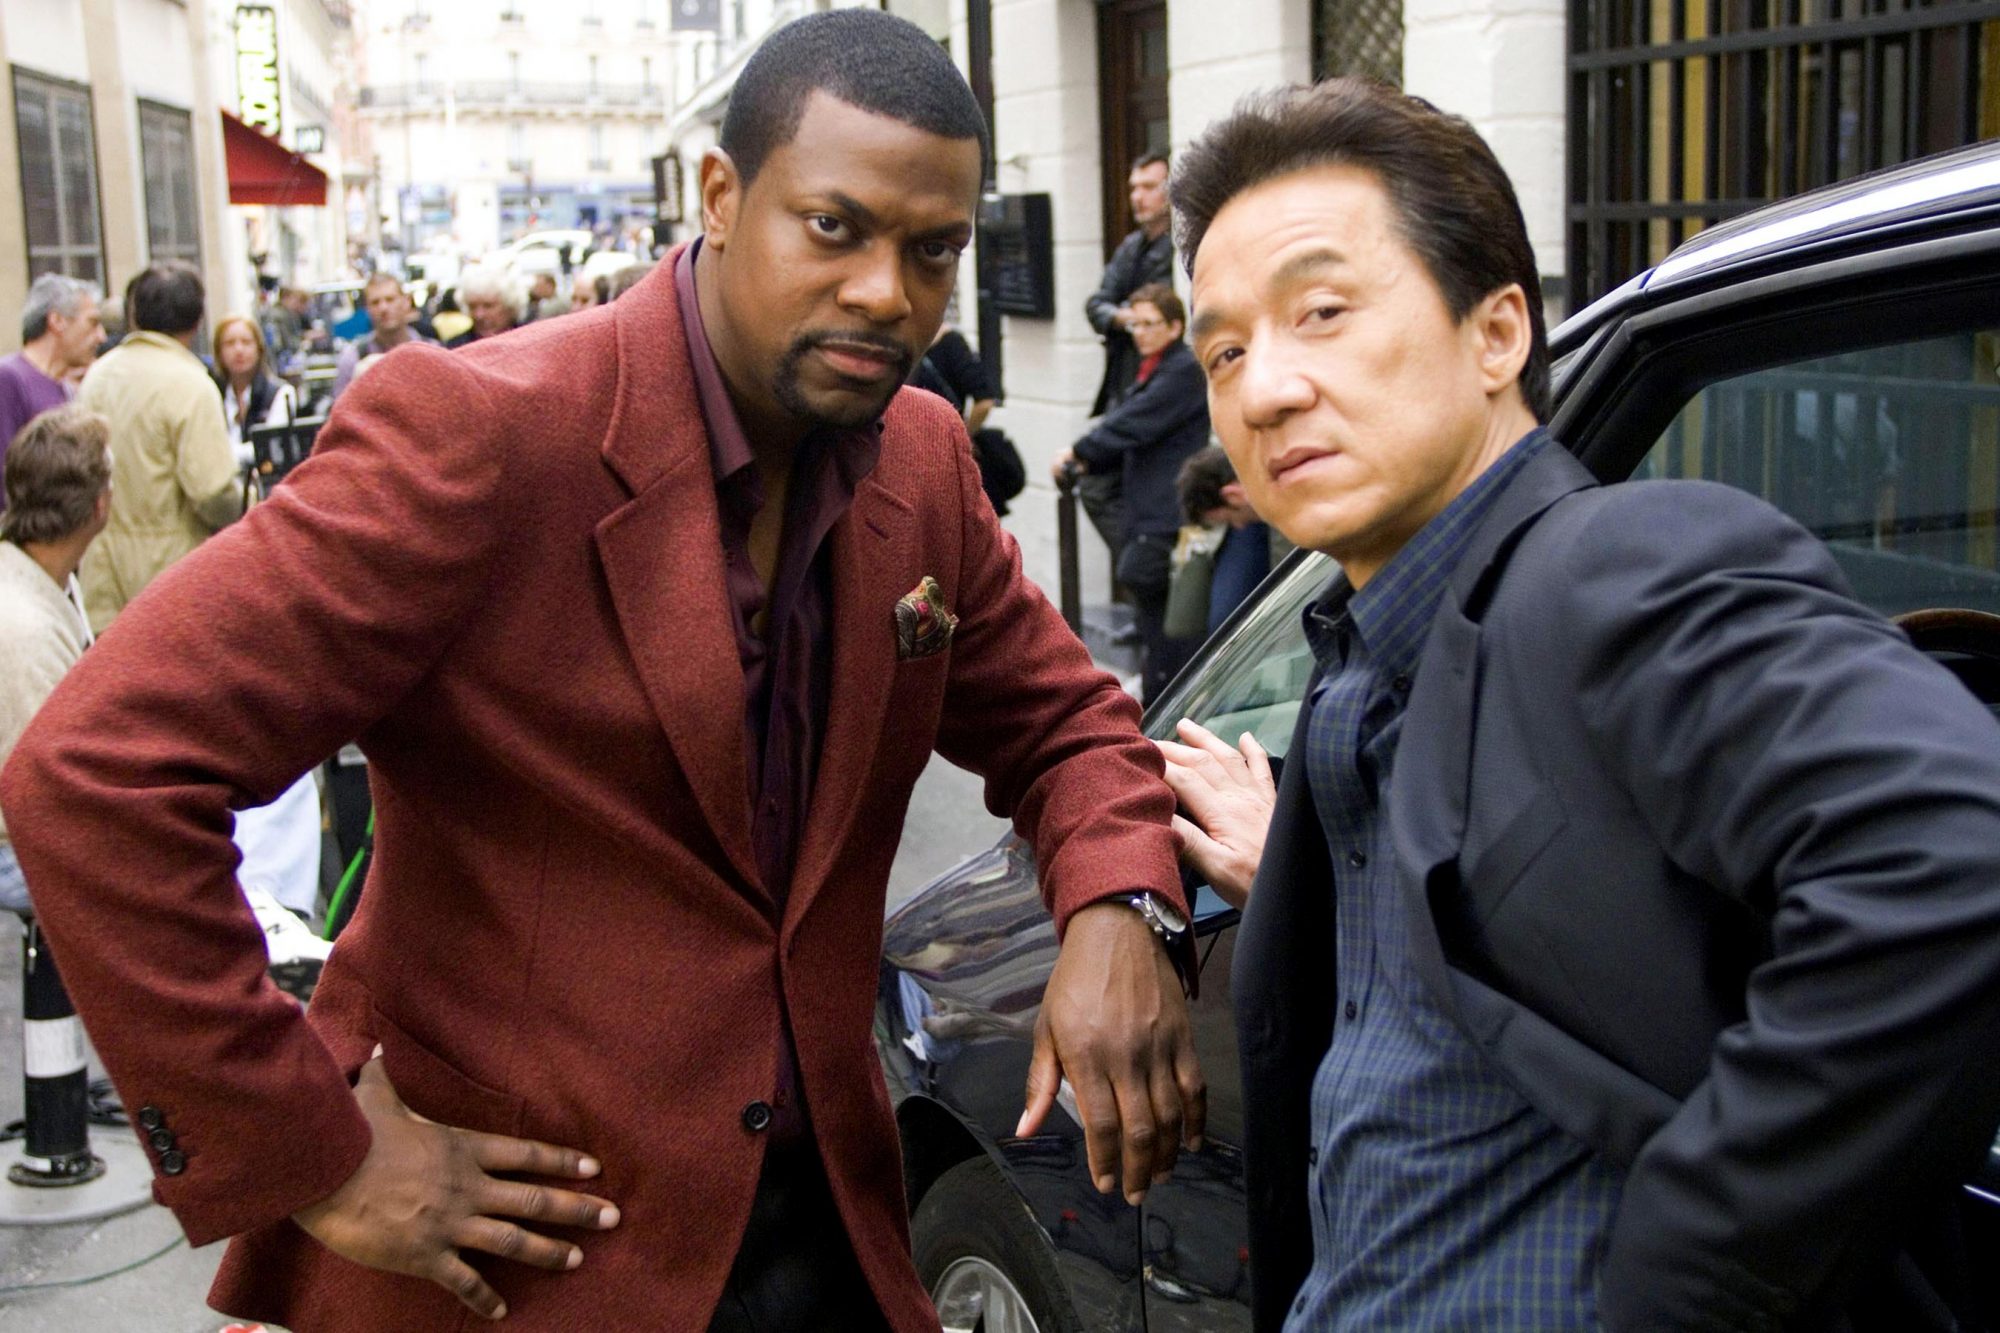 30-facts-about-the-movie-rush-hour